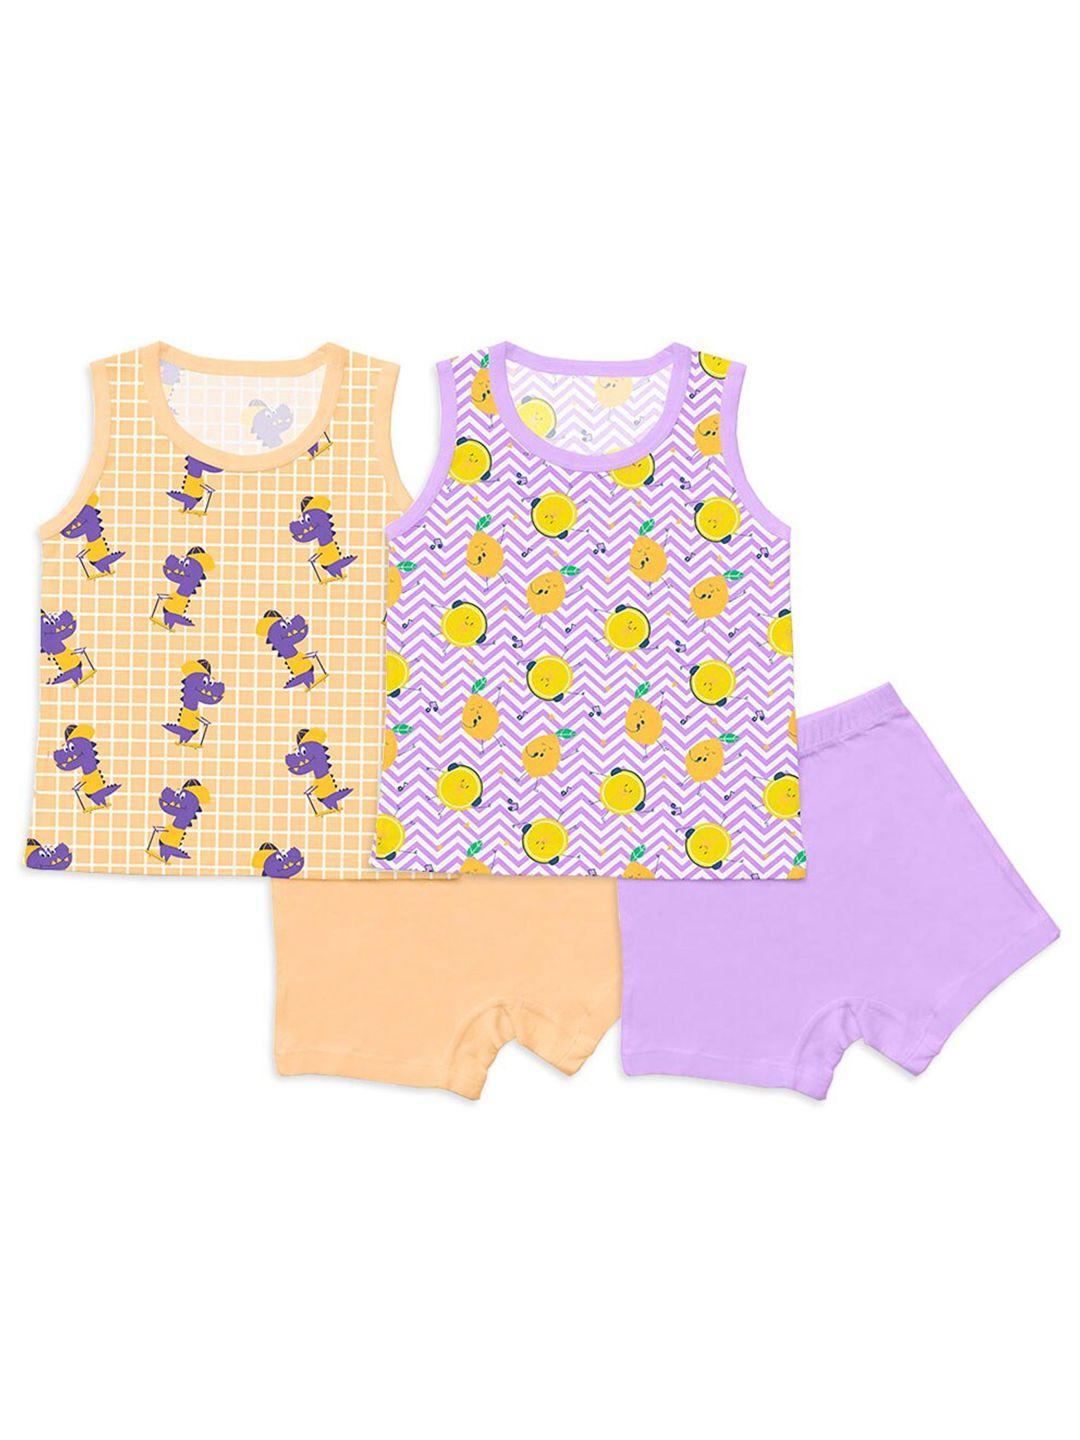 superbottoms kids pack of 2 yellow & purple printed t shirt & shorts